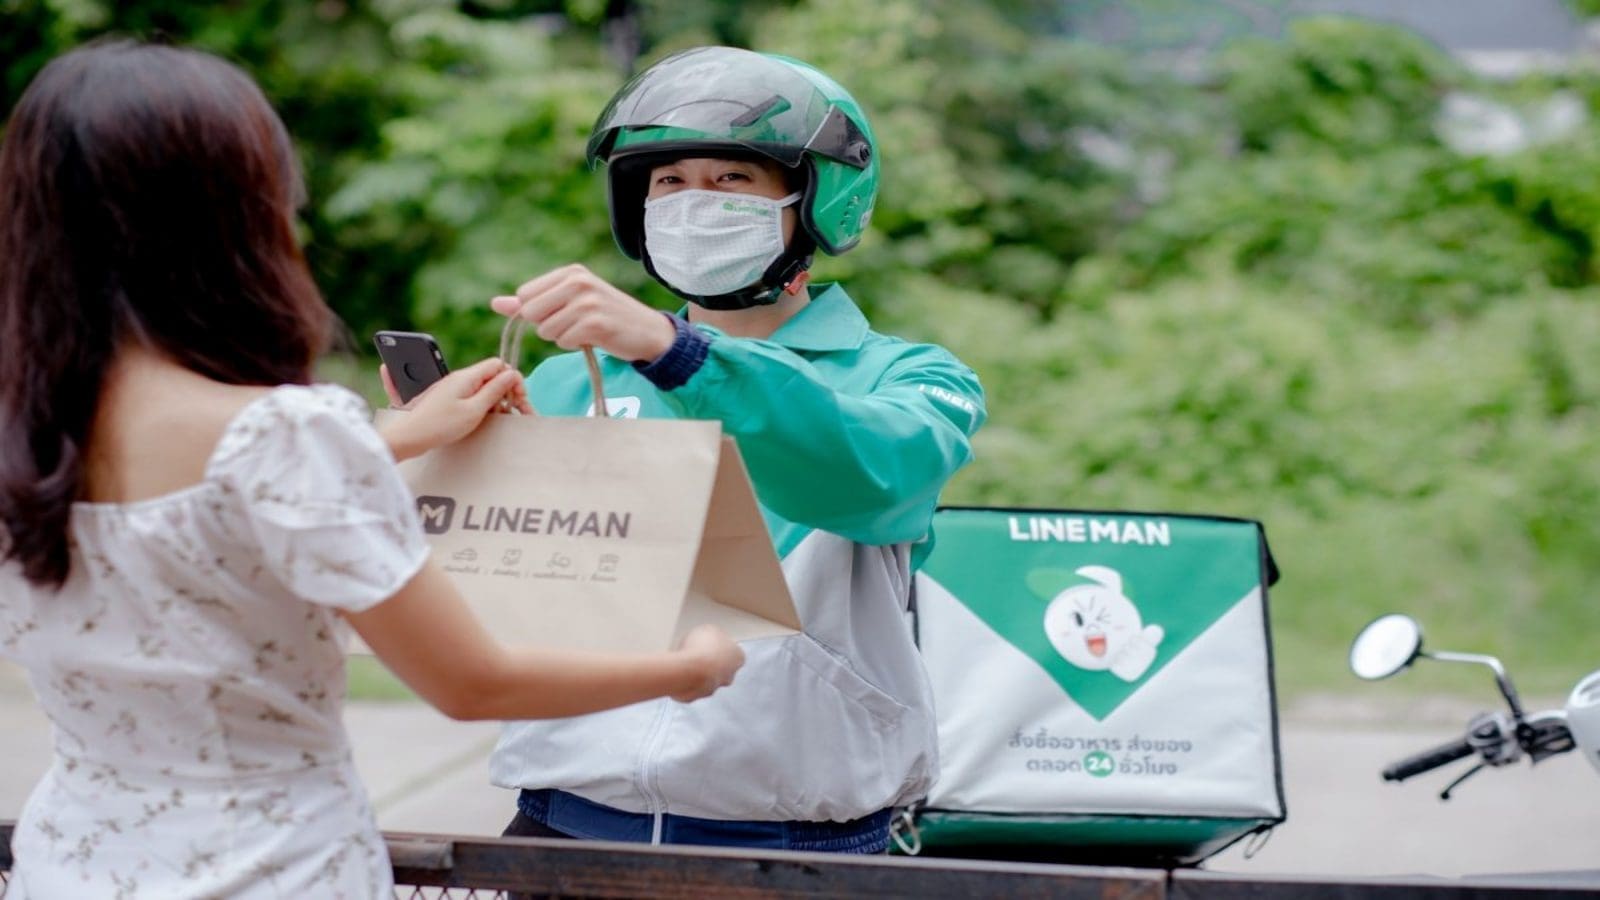 Line Man Wongnai raises US$265m to strengthen food delivery business